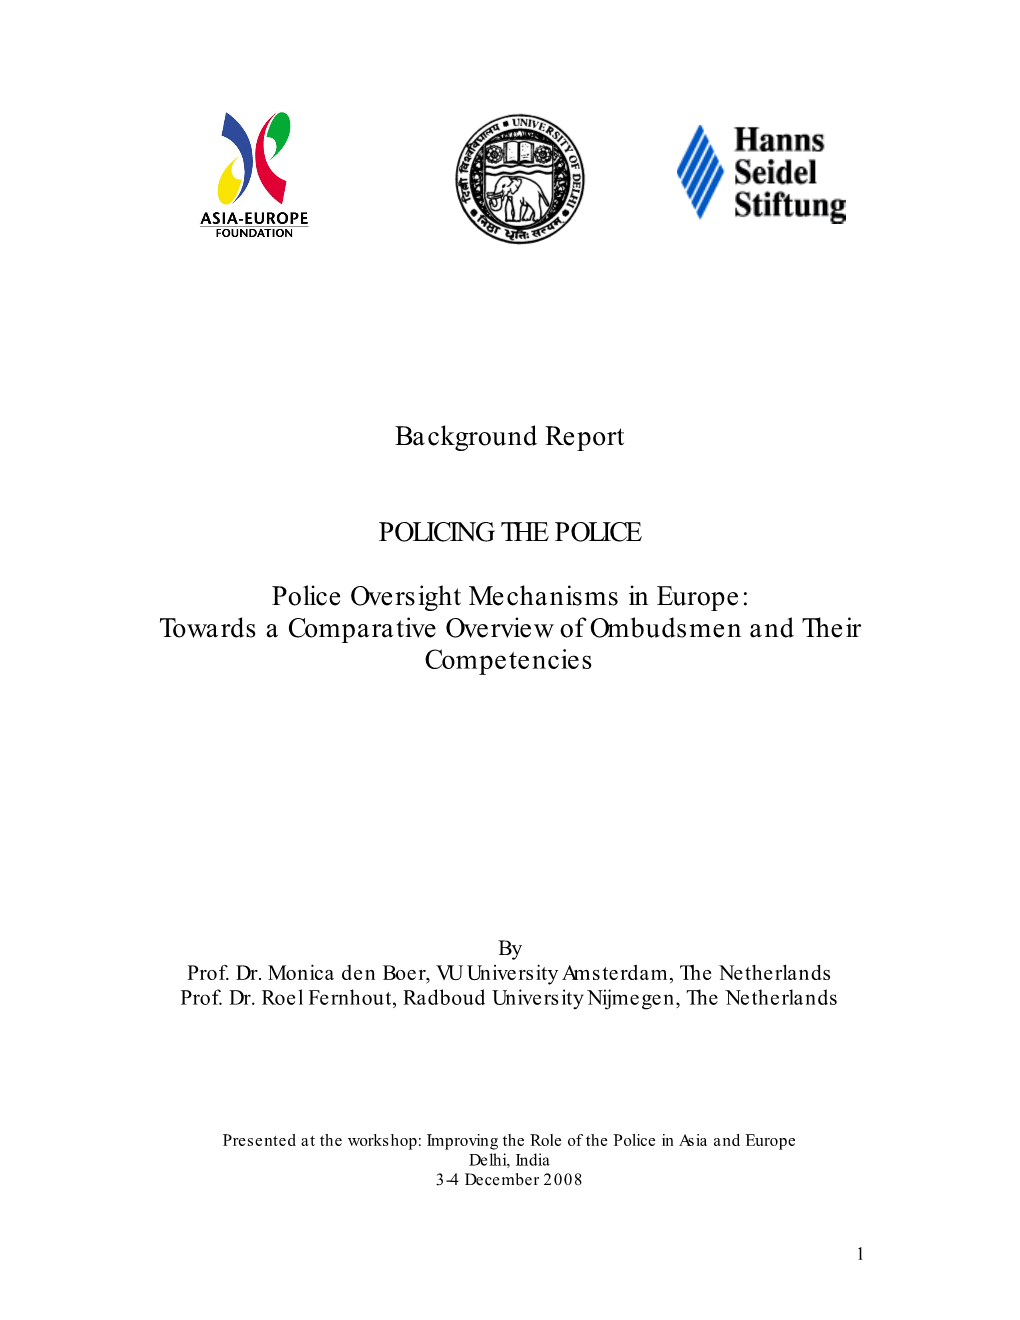 Police Oversight Mechanisms in Europe.Pdf